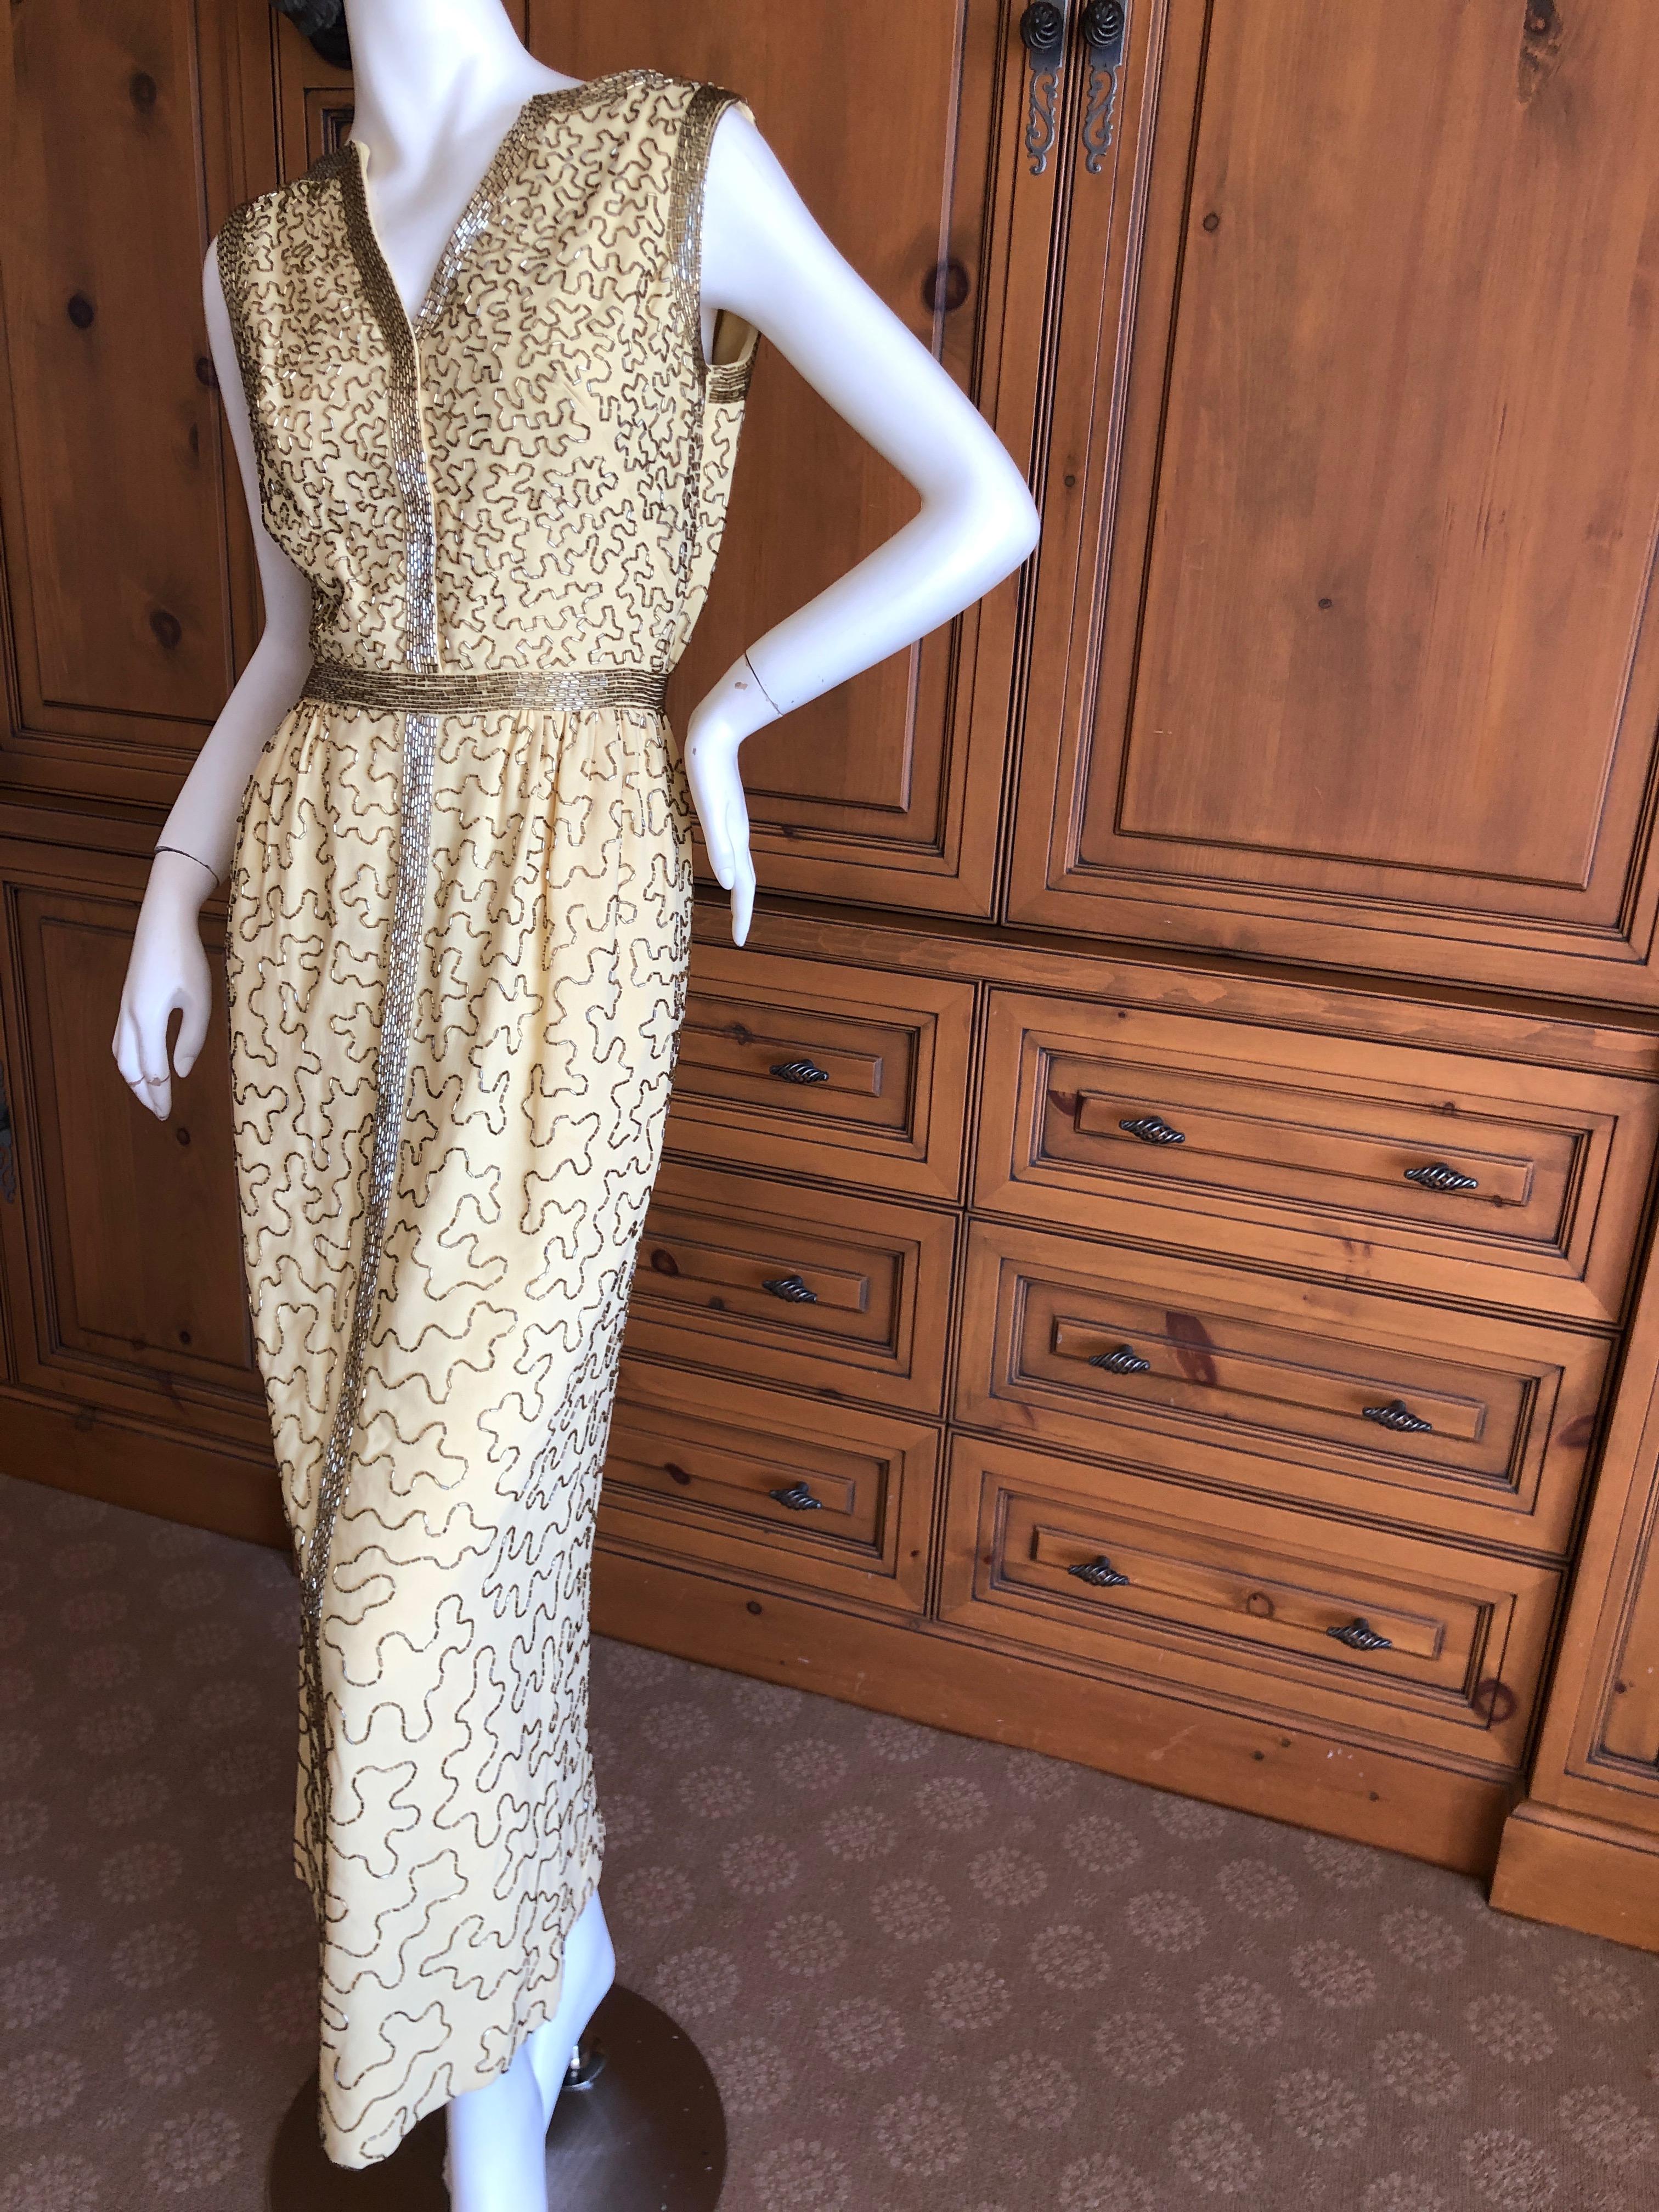 Oscar de la Renta Heavily Embellished Yellow Vintage 70's  Evening Dress 
Simply Stunning. Please use the zoom feature to see al the remarkable details.
There is no size tag
Appx Size 6-8
Bust 38